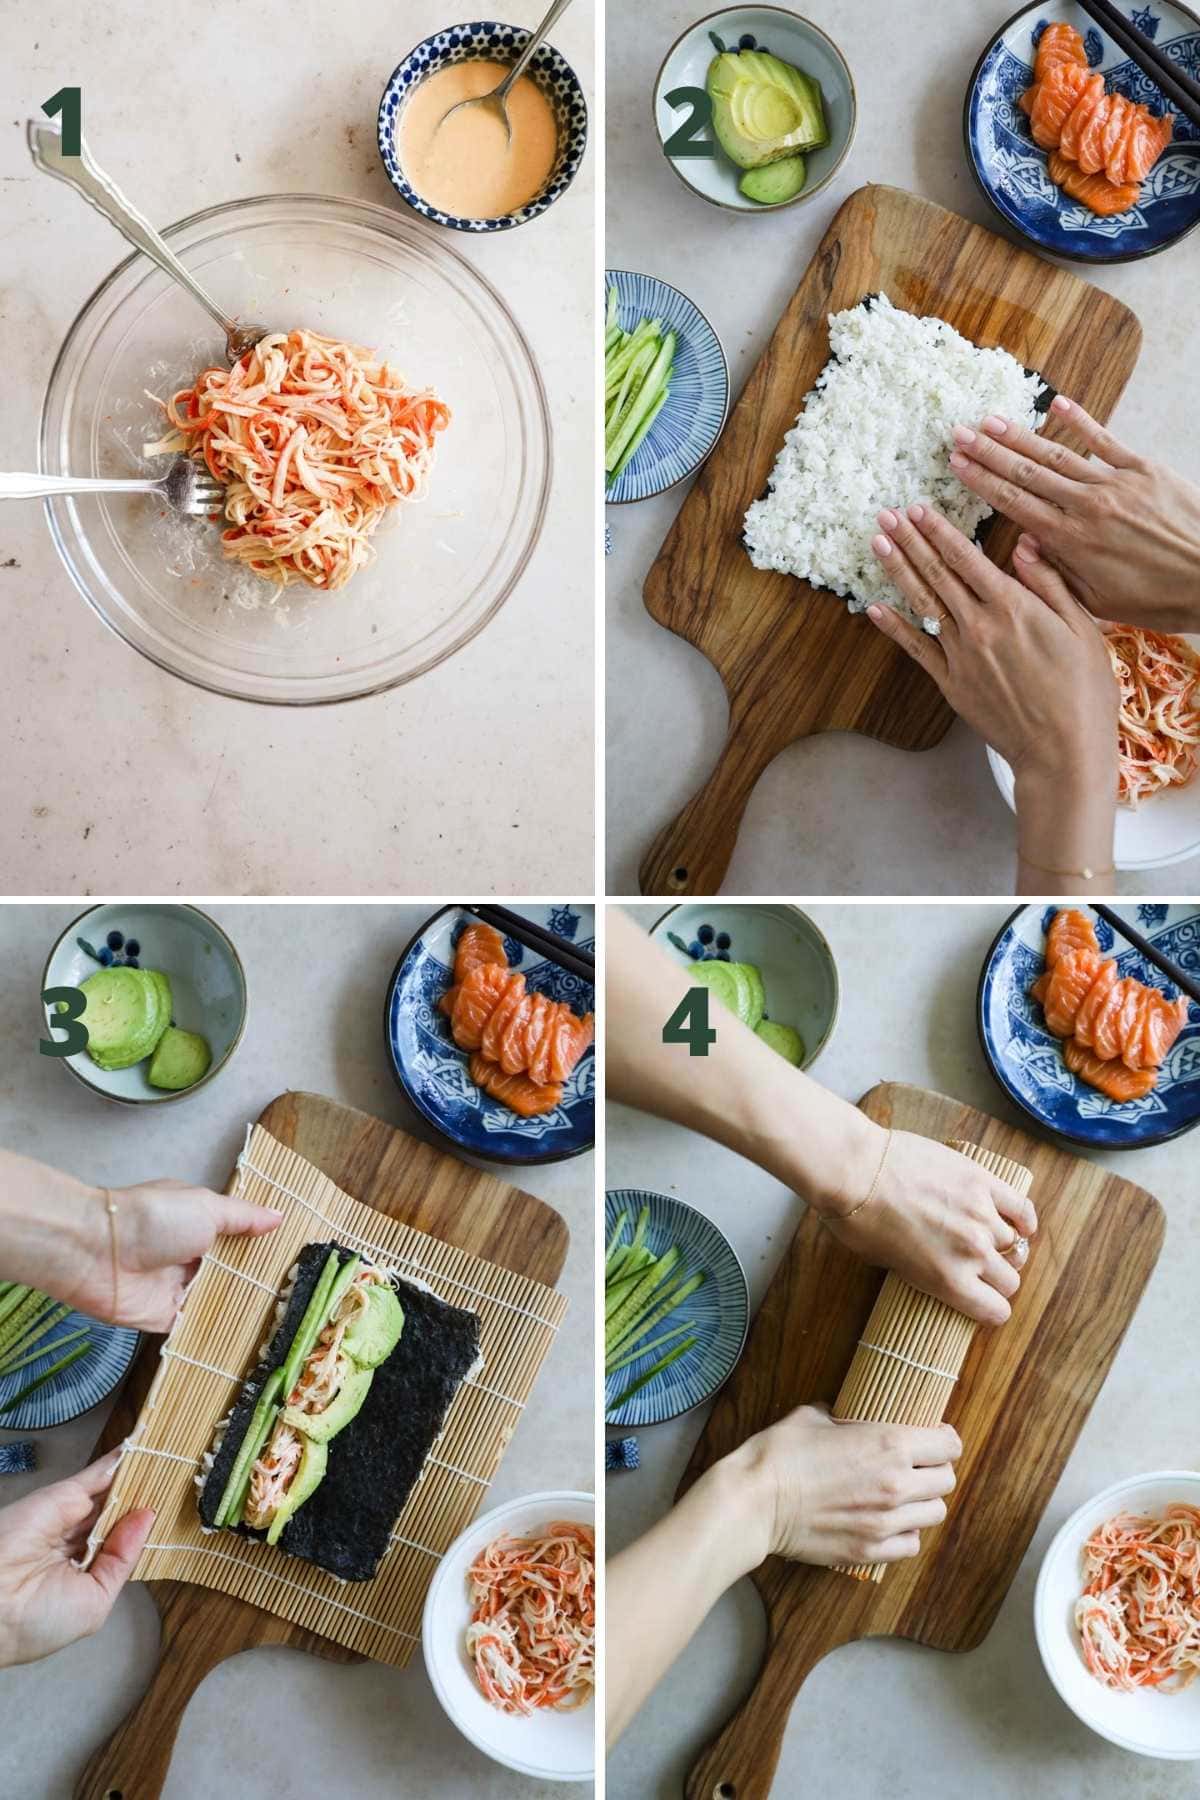 Steps to make an Alaska sushi roll, include kani with kewpie mayo, rice, and rolling avocado and cucumber.